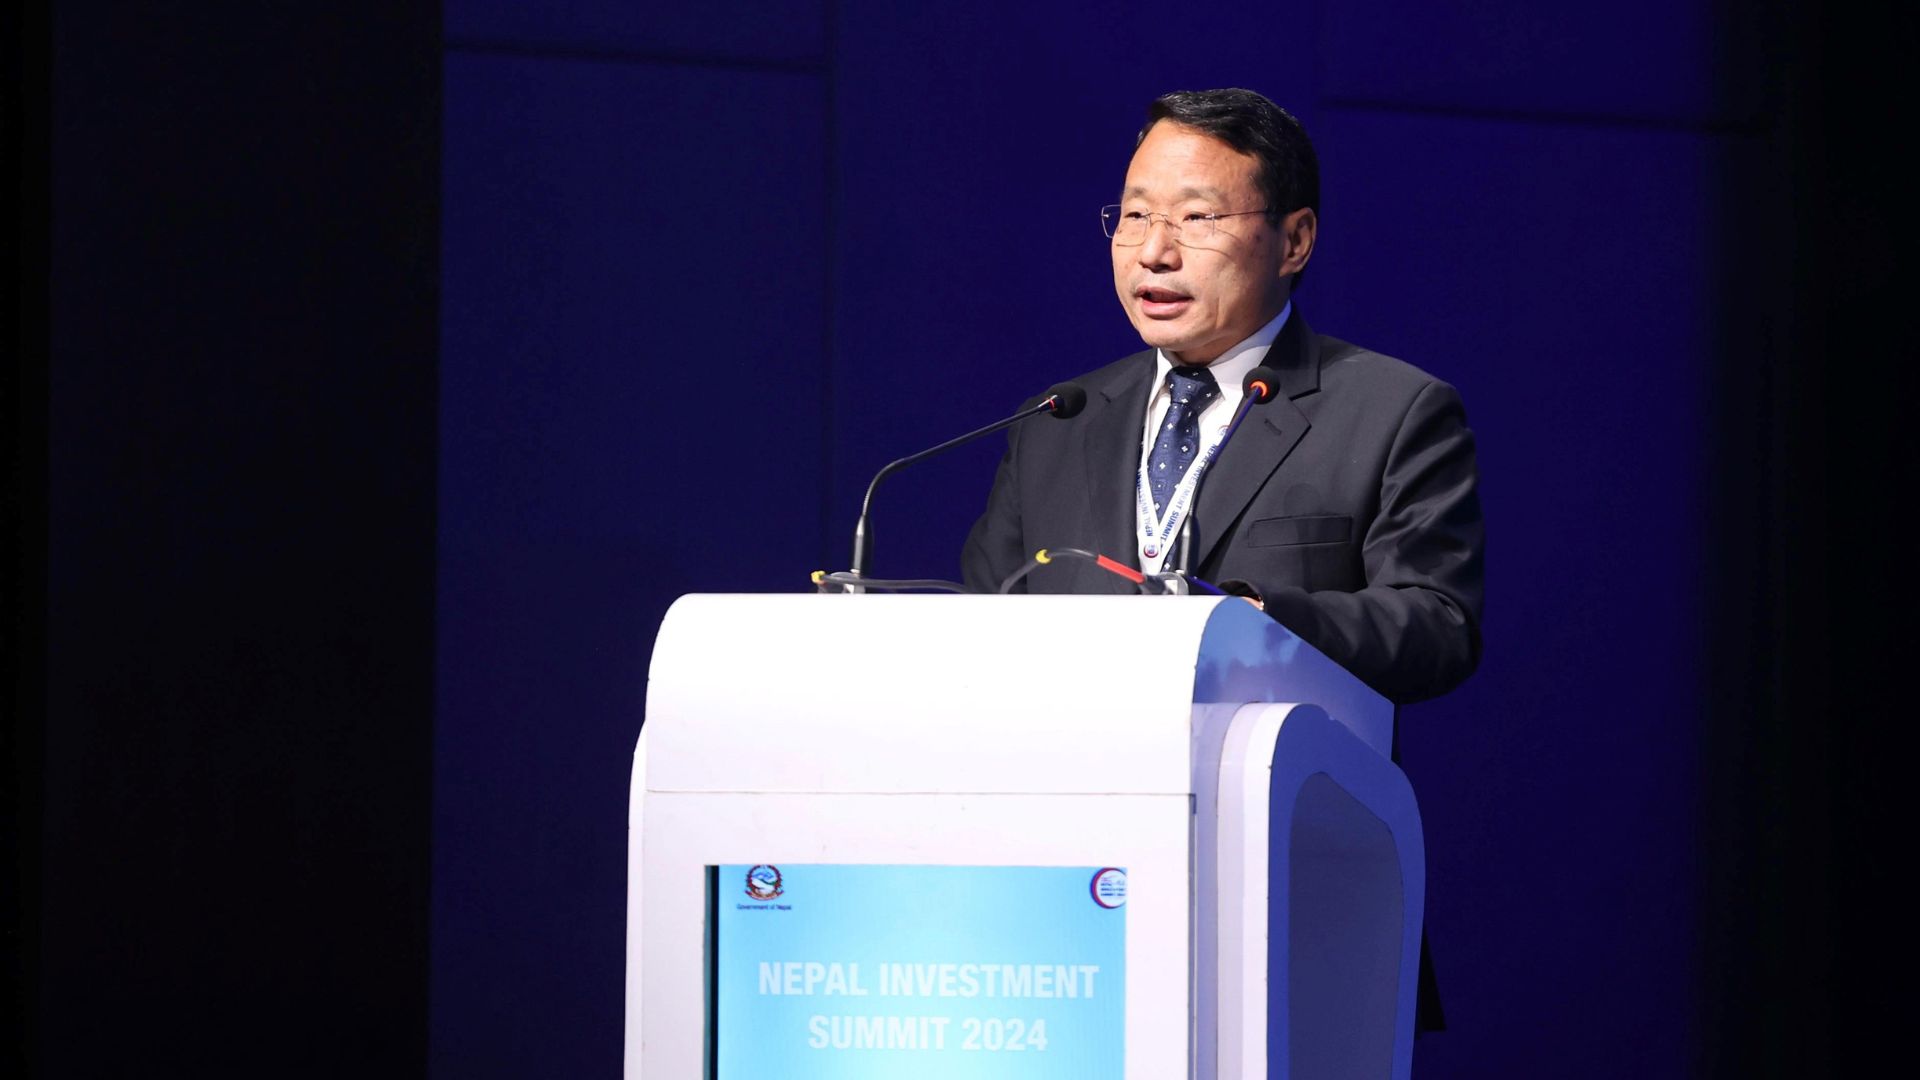 Nepal is attractive destination for international investment: Finance Minister Pun  